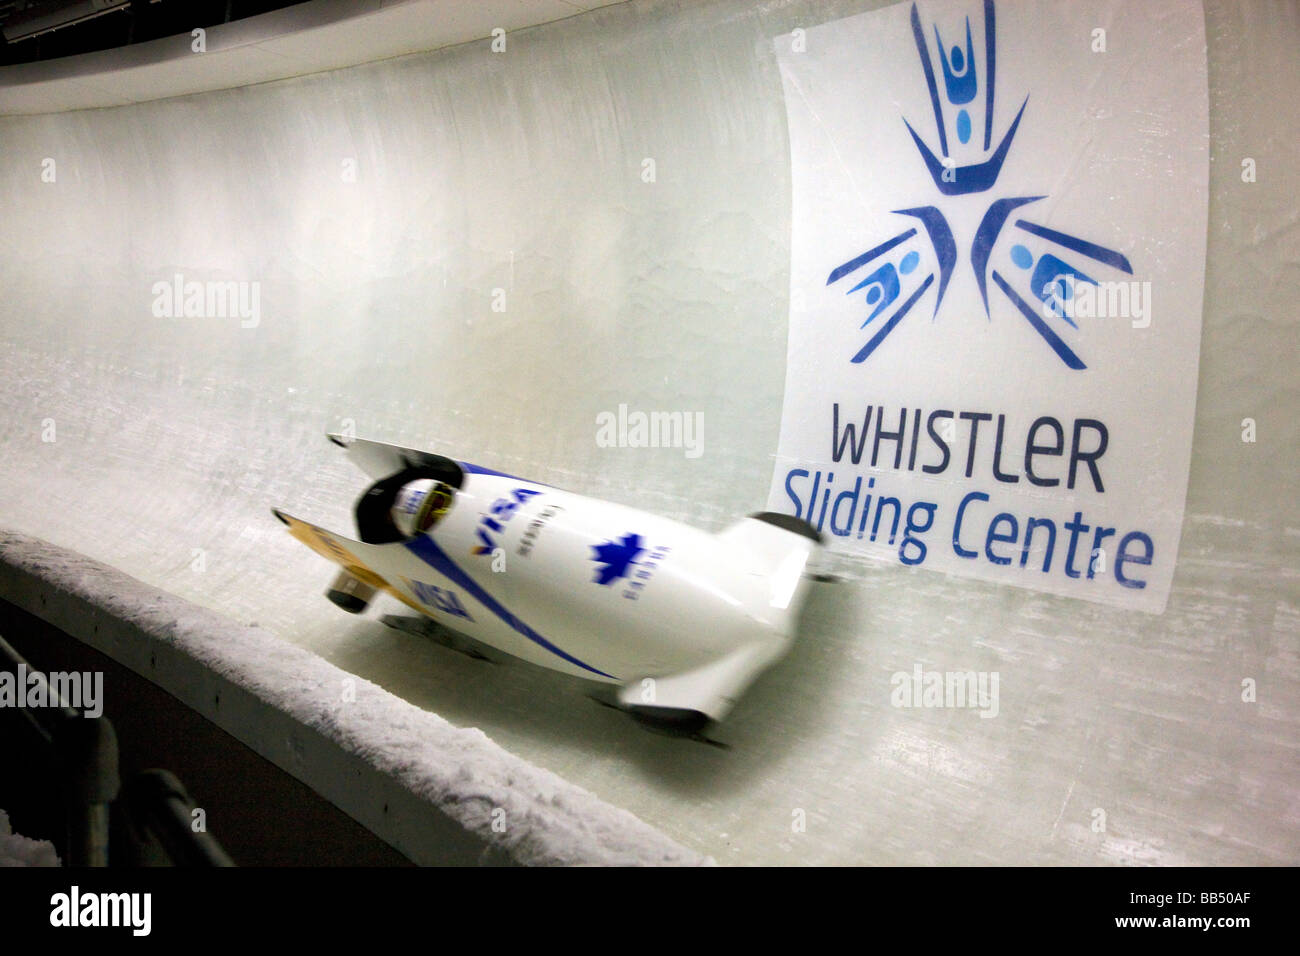 A bobsled at the Whistler Sliding Centre a sports venue for the 2010 Vancouver Winter Olympics Whistler British Columbia Canada Stock Photo